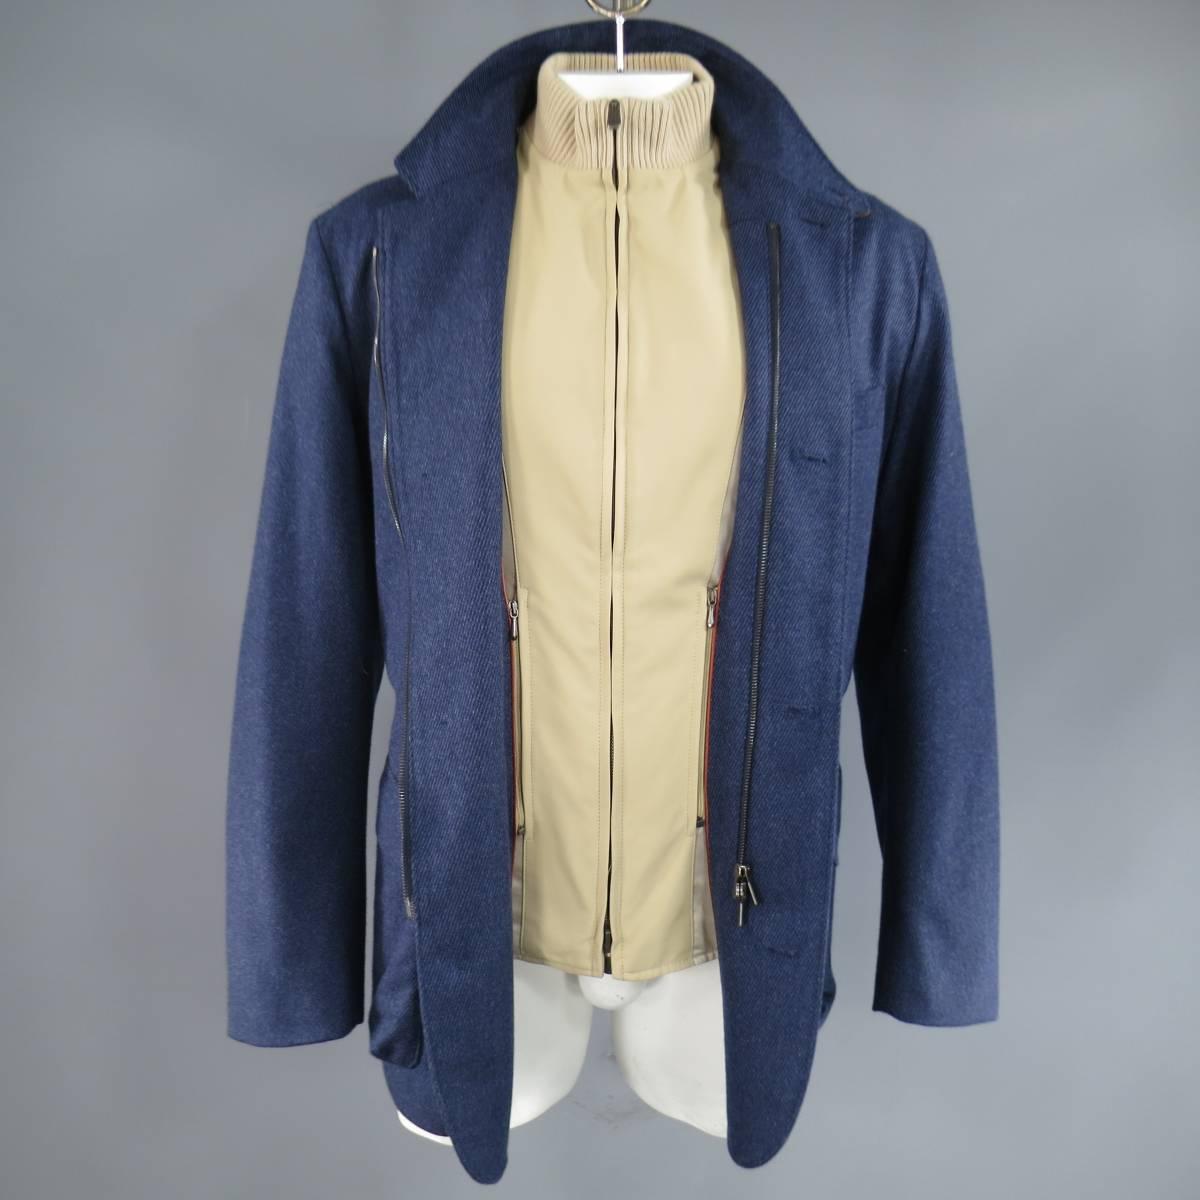 This classic LORO PIANA coat comes in a dark blue stripe textured cashmere an features a high collar neck with button tab and brown suede lining, button up and zip closure, double patch flap pockets, plaid Strom System liner, and detachable zip off